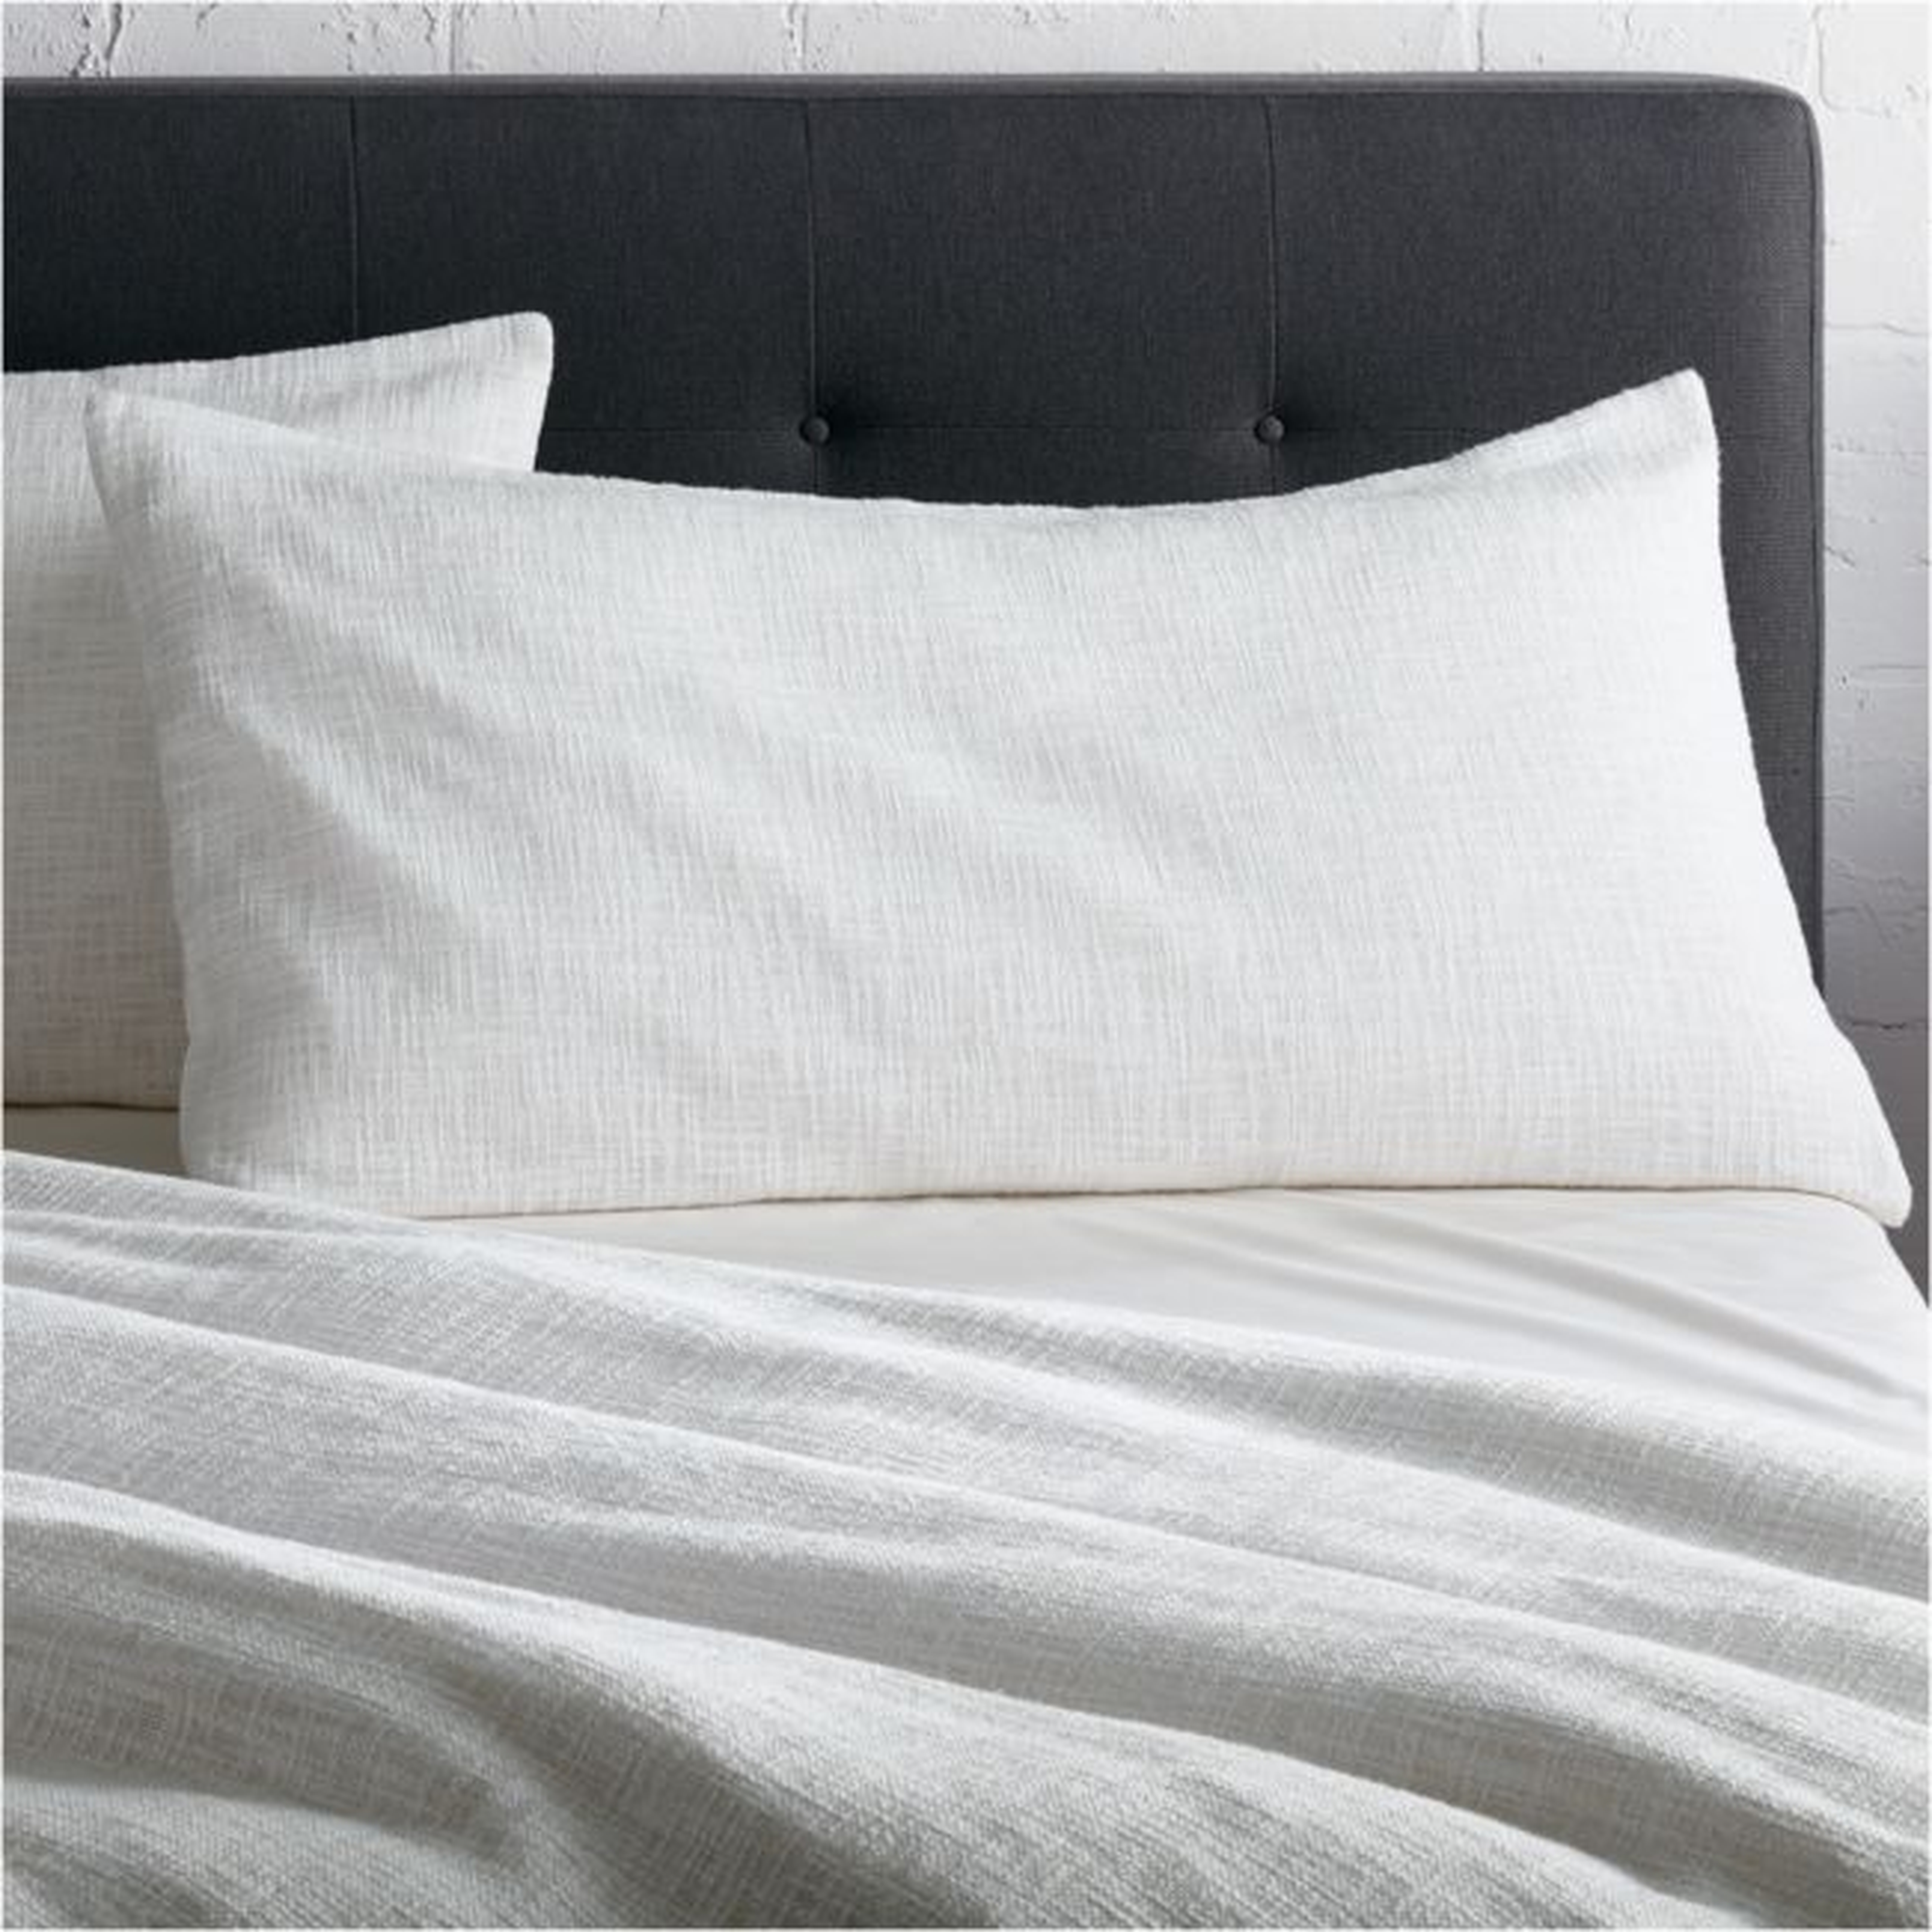 Lindstrom Cotton White King Sham - Crate and Barrel